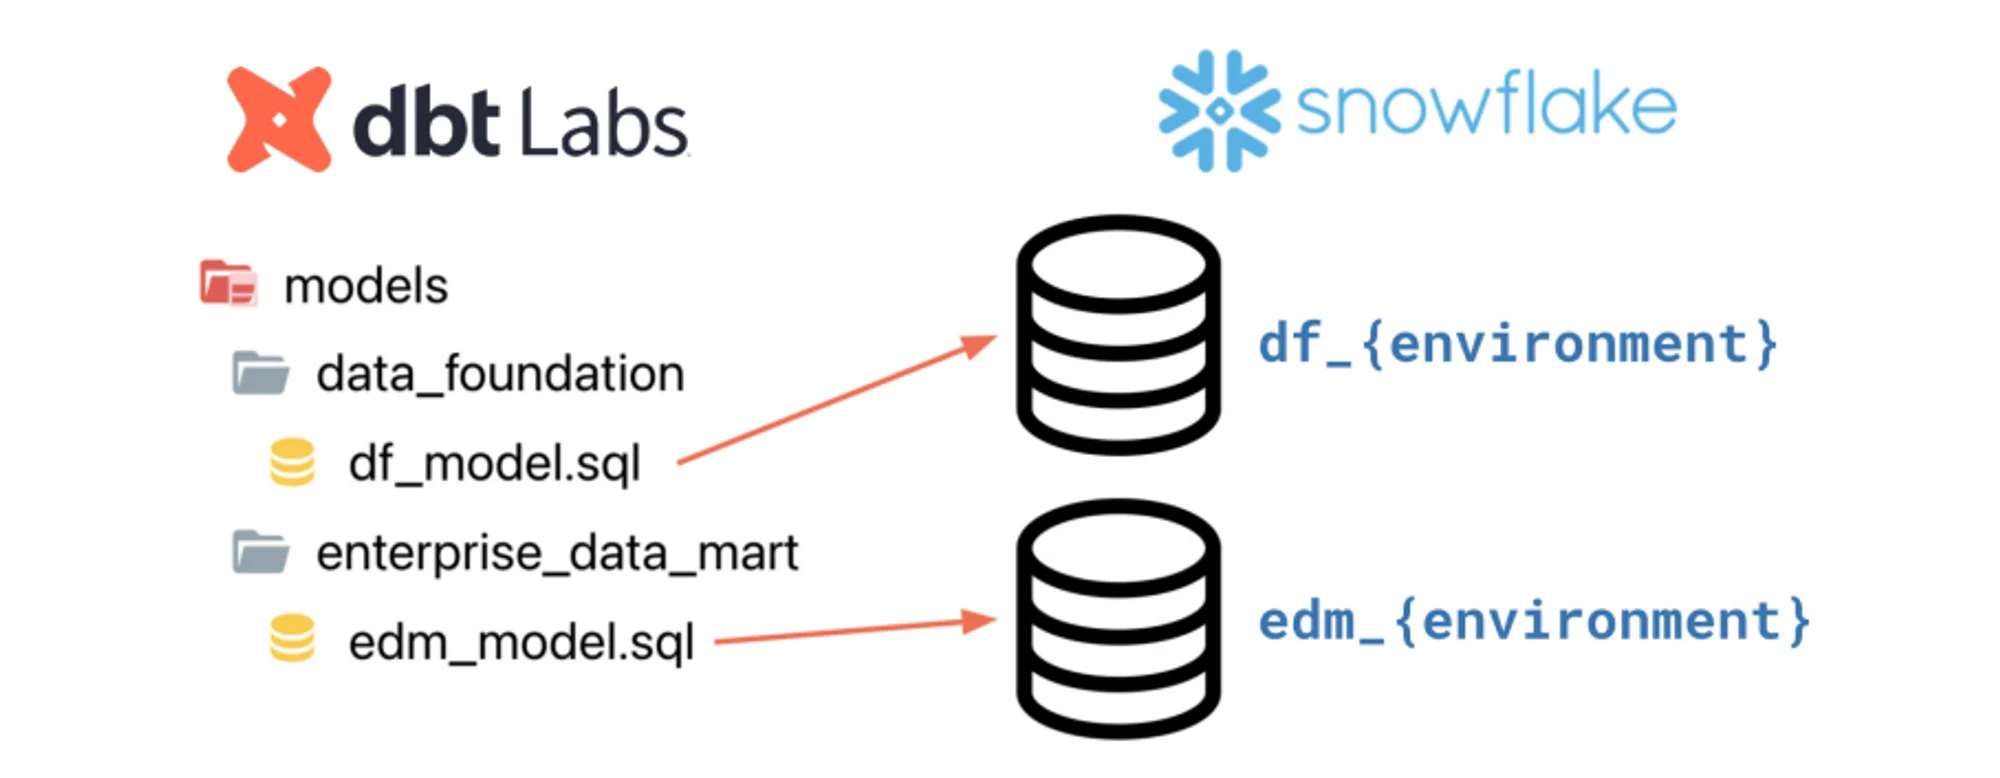 Transforming data with dbt in Snowflake